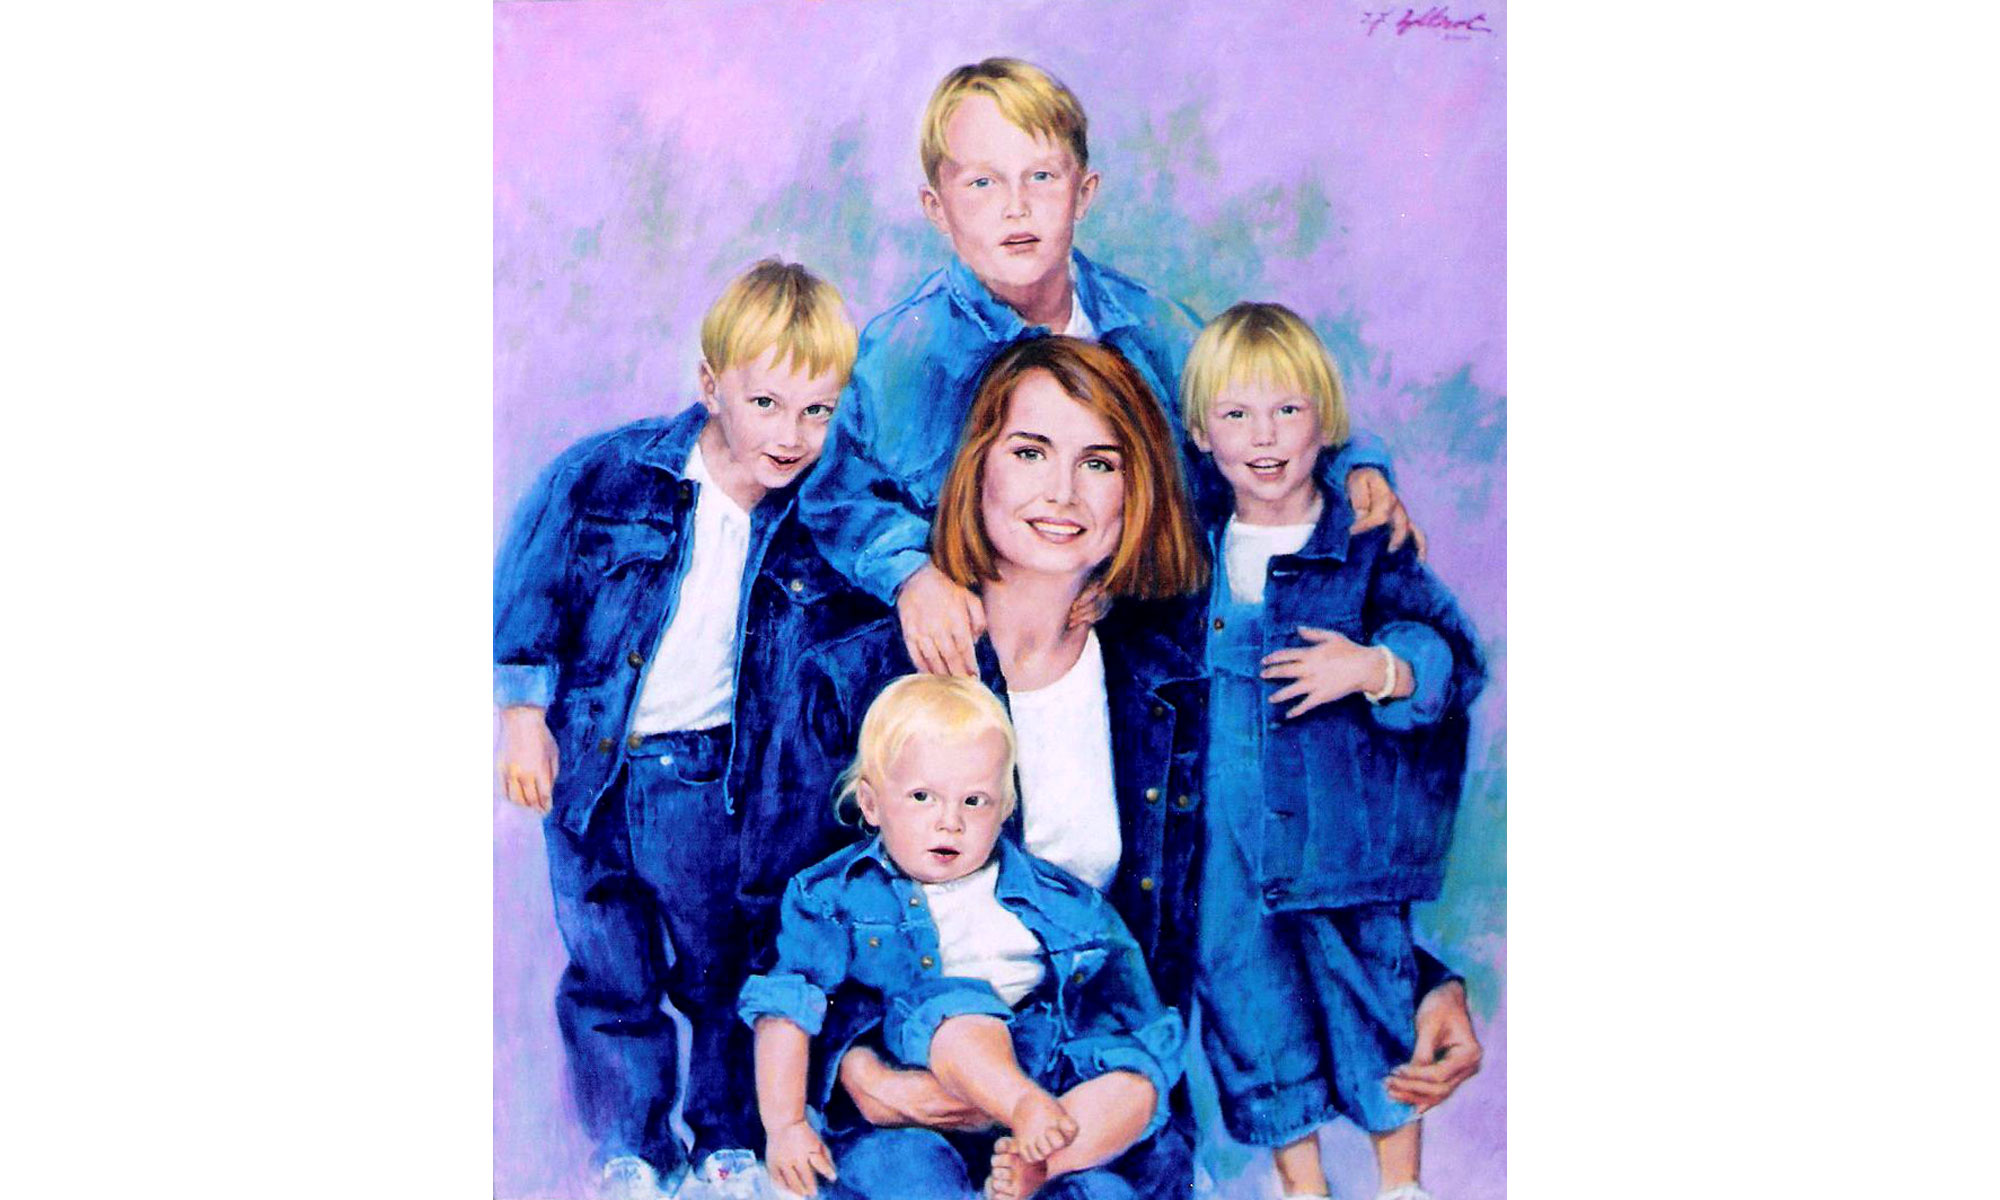 Mrs Frank Warren and Children Portrait Painting by Terence J Gilbert Oil on Canvas